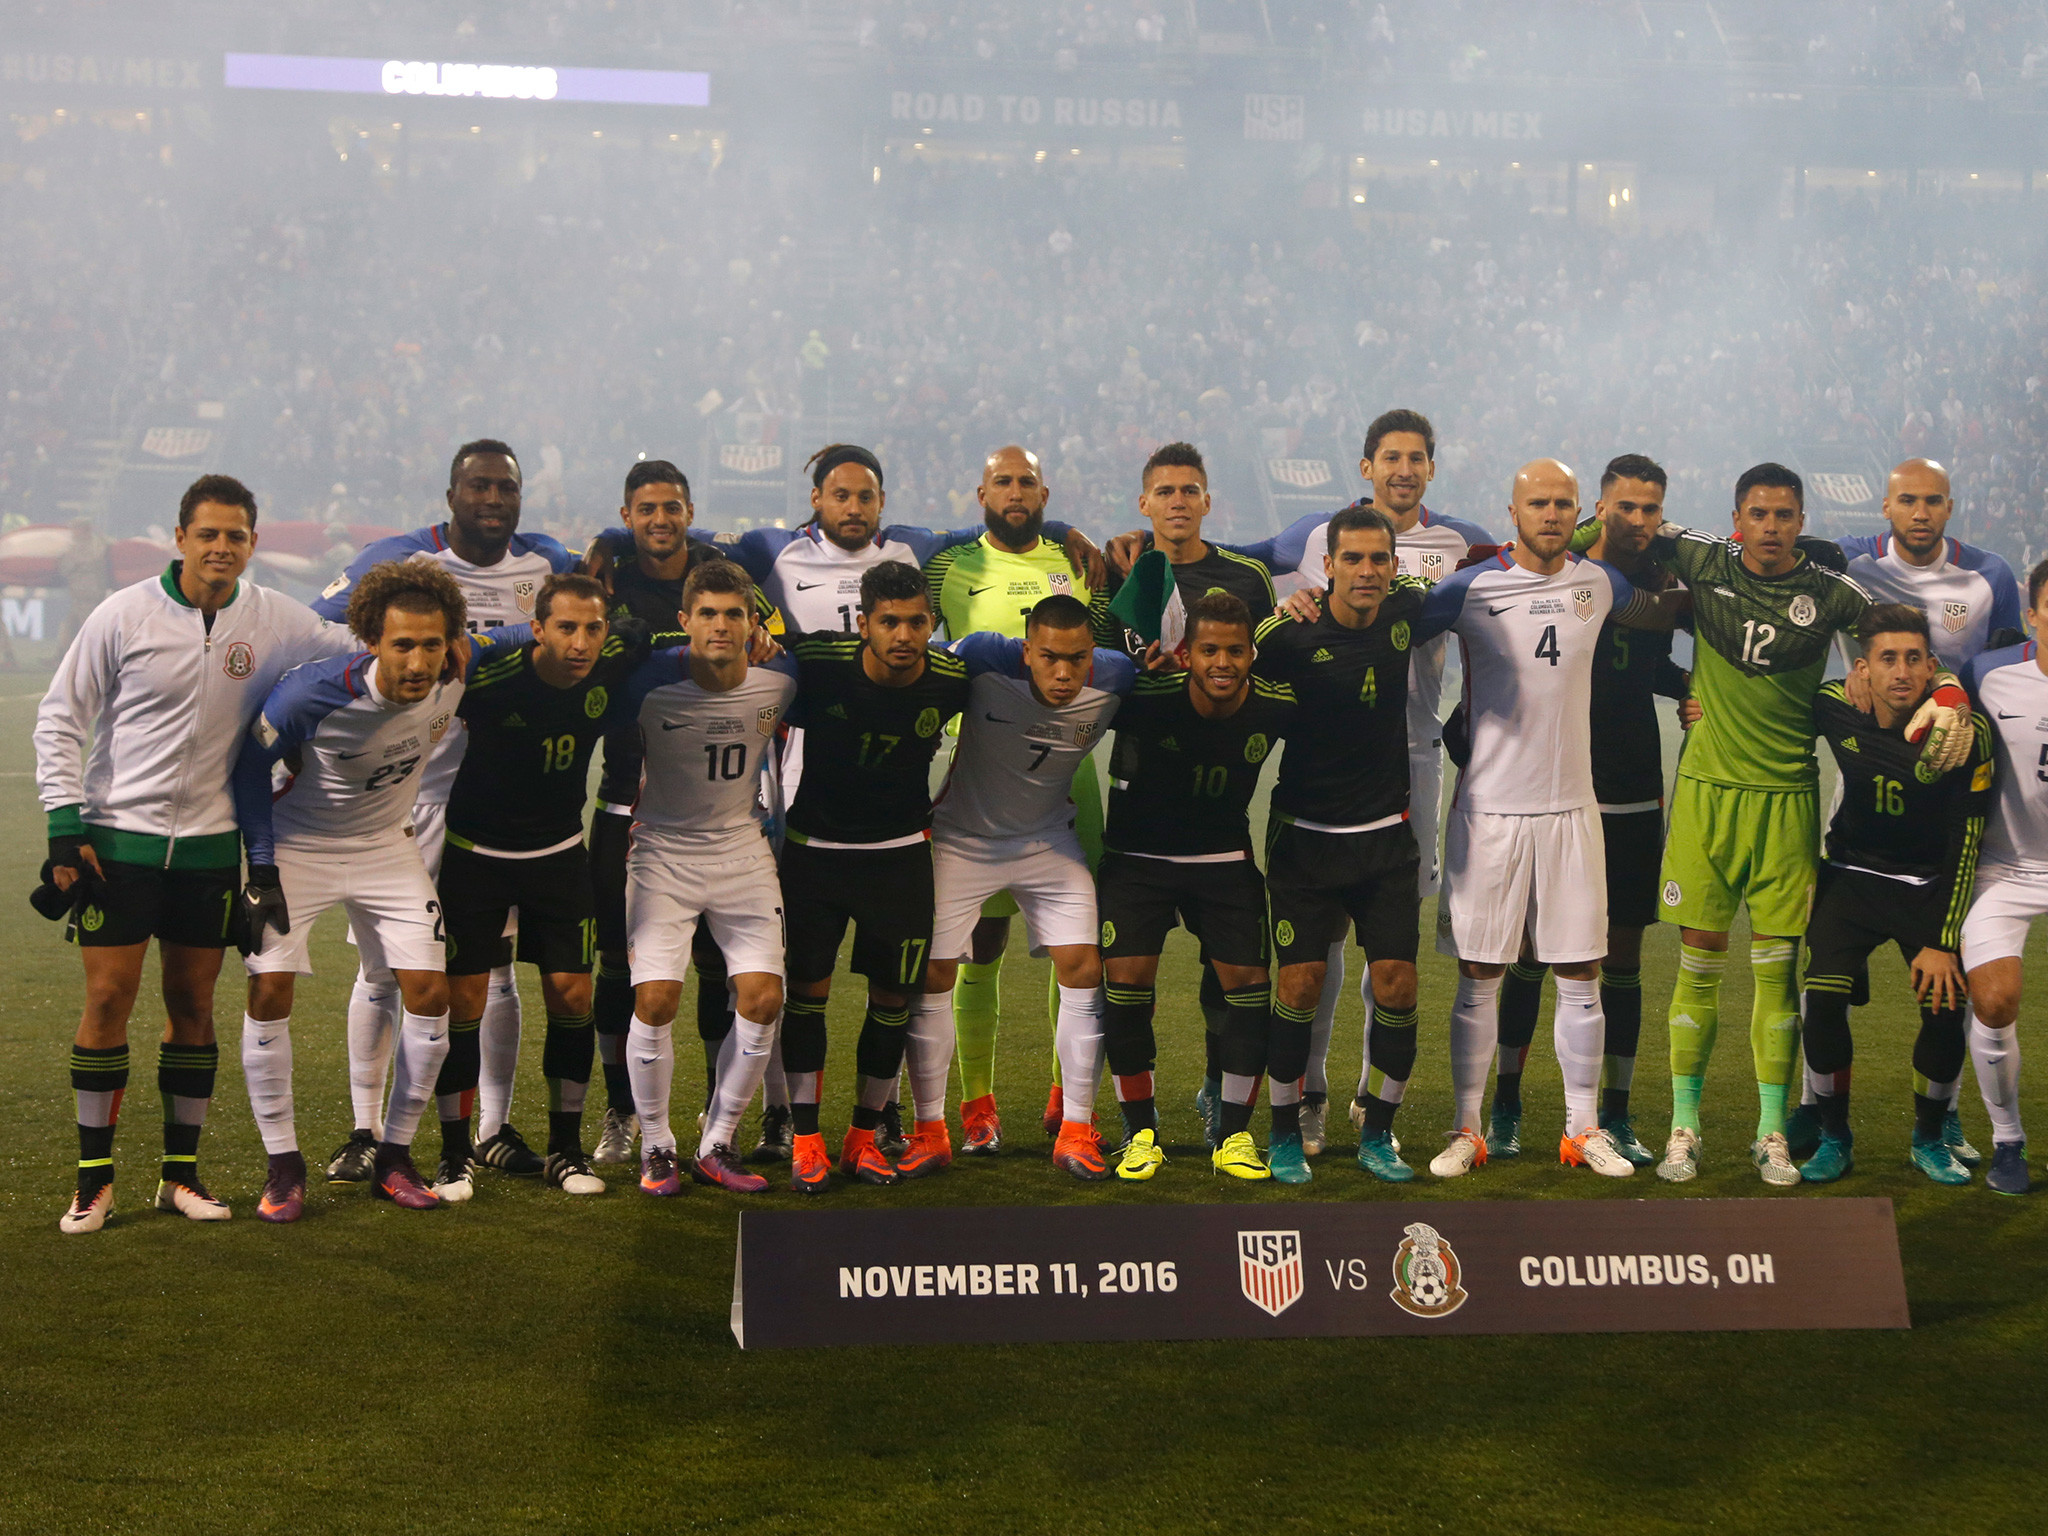 United States and Mexico form 'unity wall' before match after Donald  Trump's presidential victory | The Independent